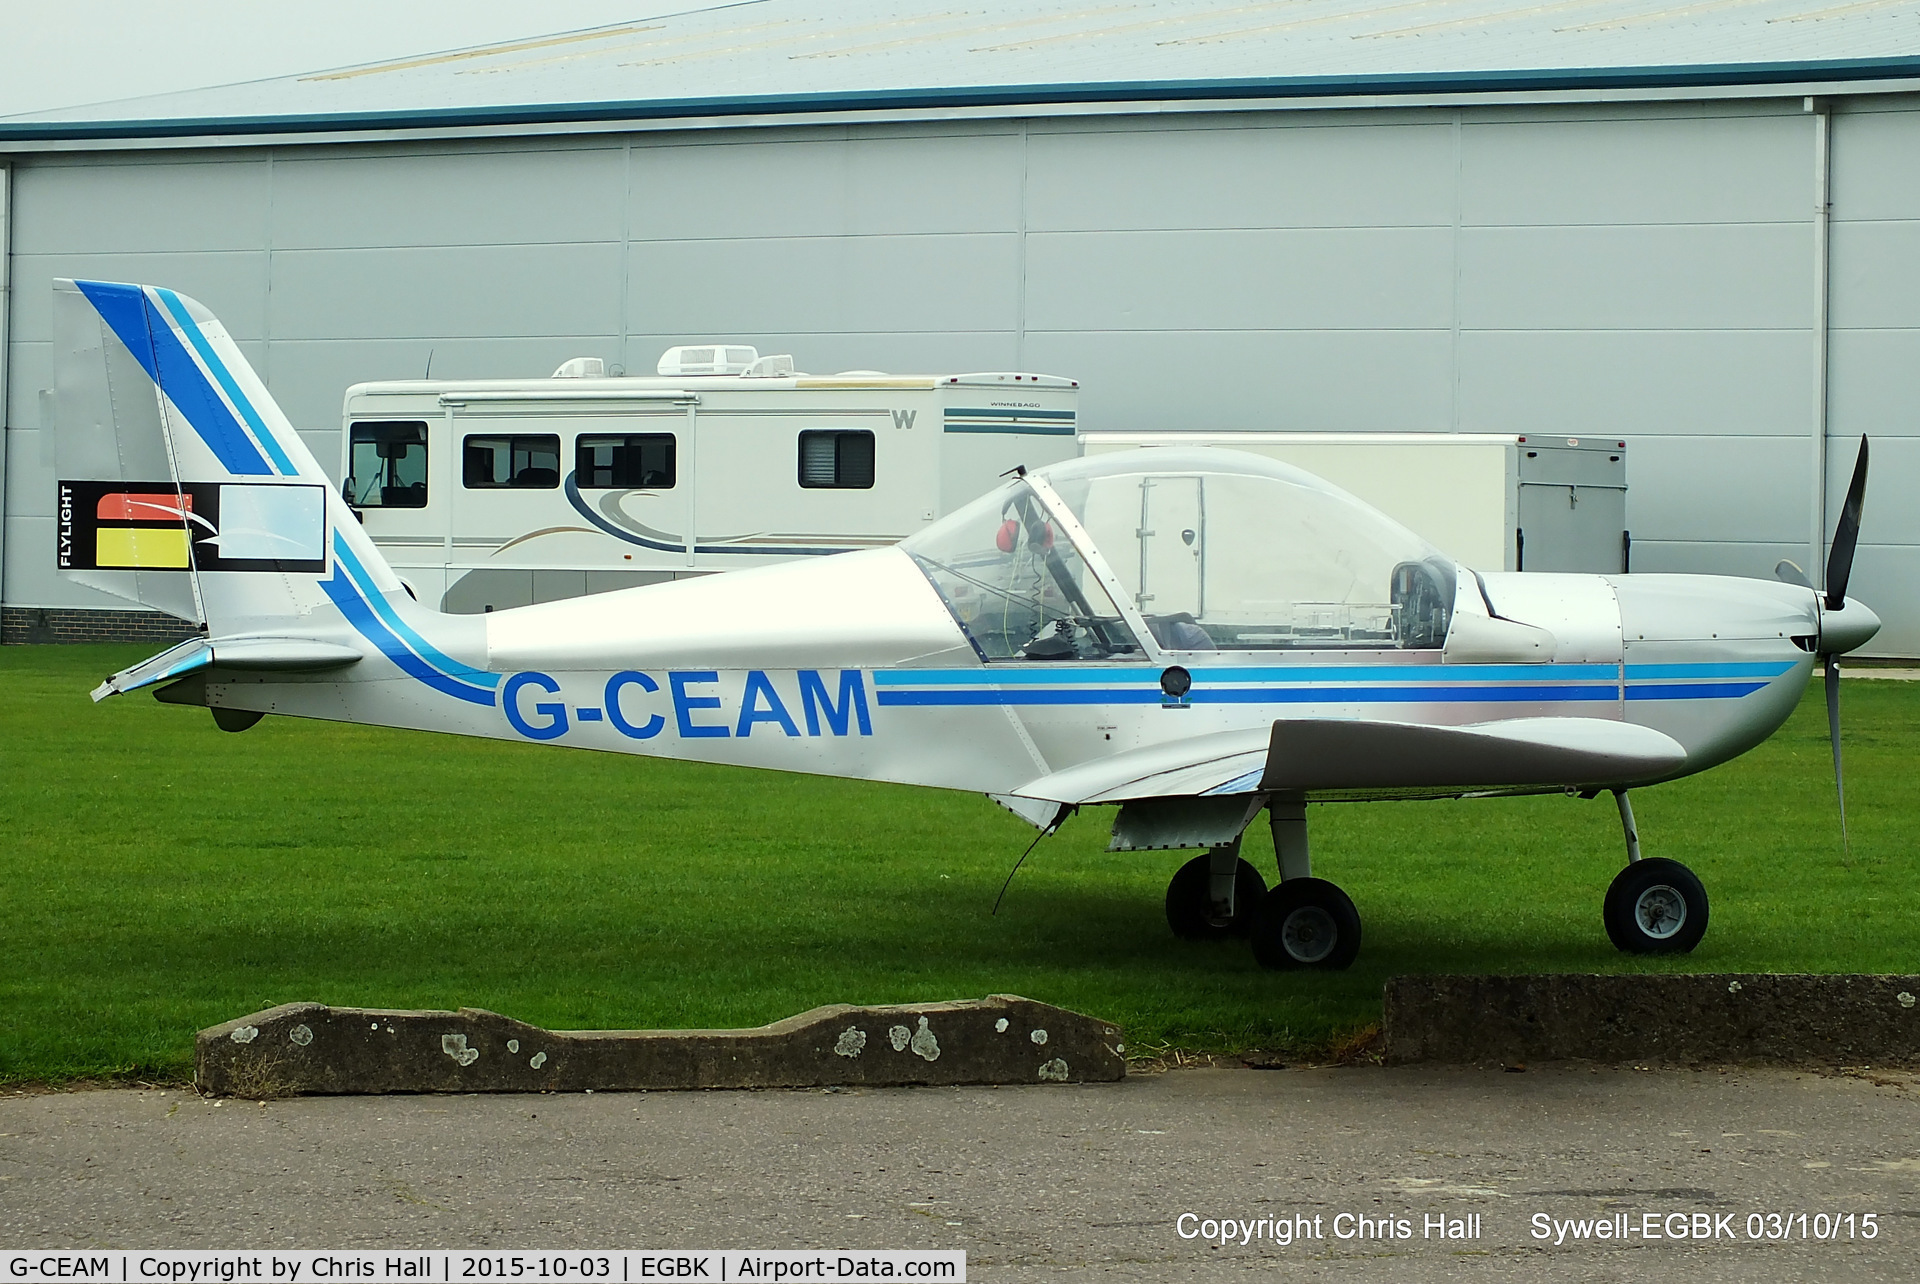 G-CEAM, 2006 Cosmik EV-97 TeamEurostar UK C/N 2729, at The Radial And Training Aircraft Fly-in